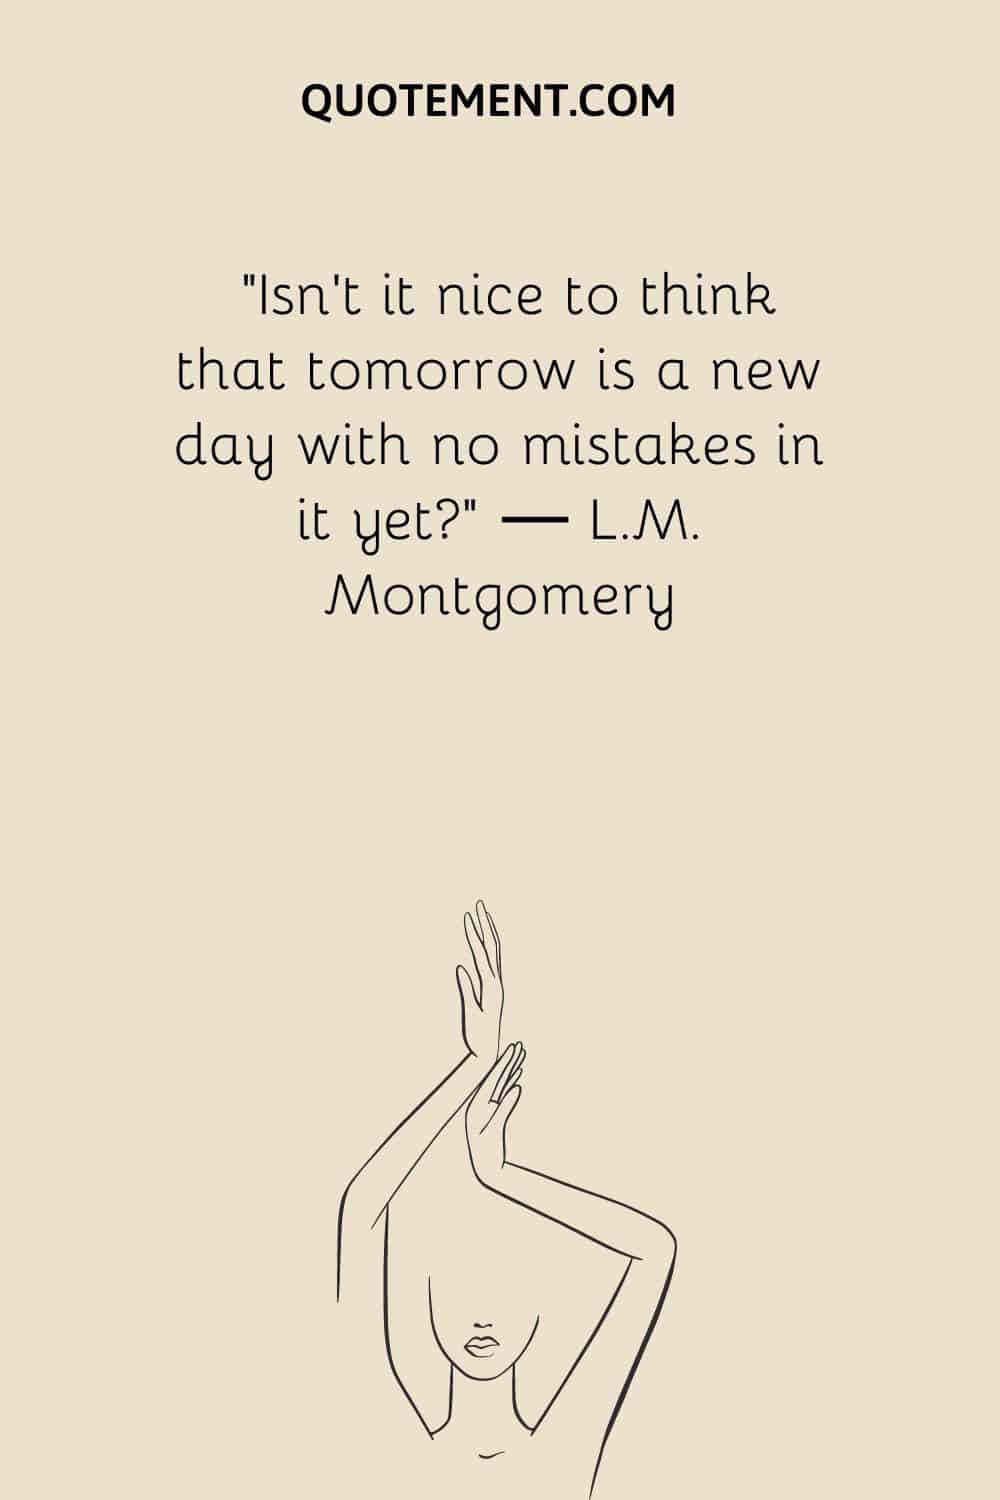 Isn’t it nice to think that tomorrow is a new day with no mistakes in it yet